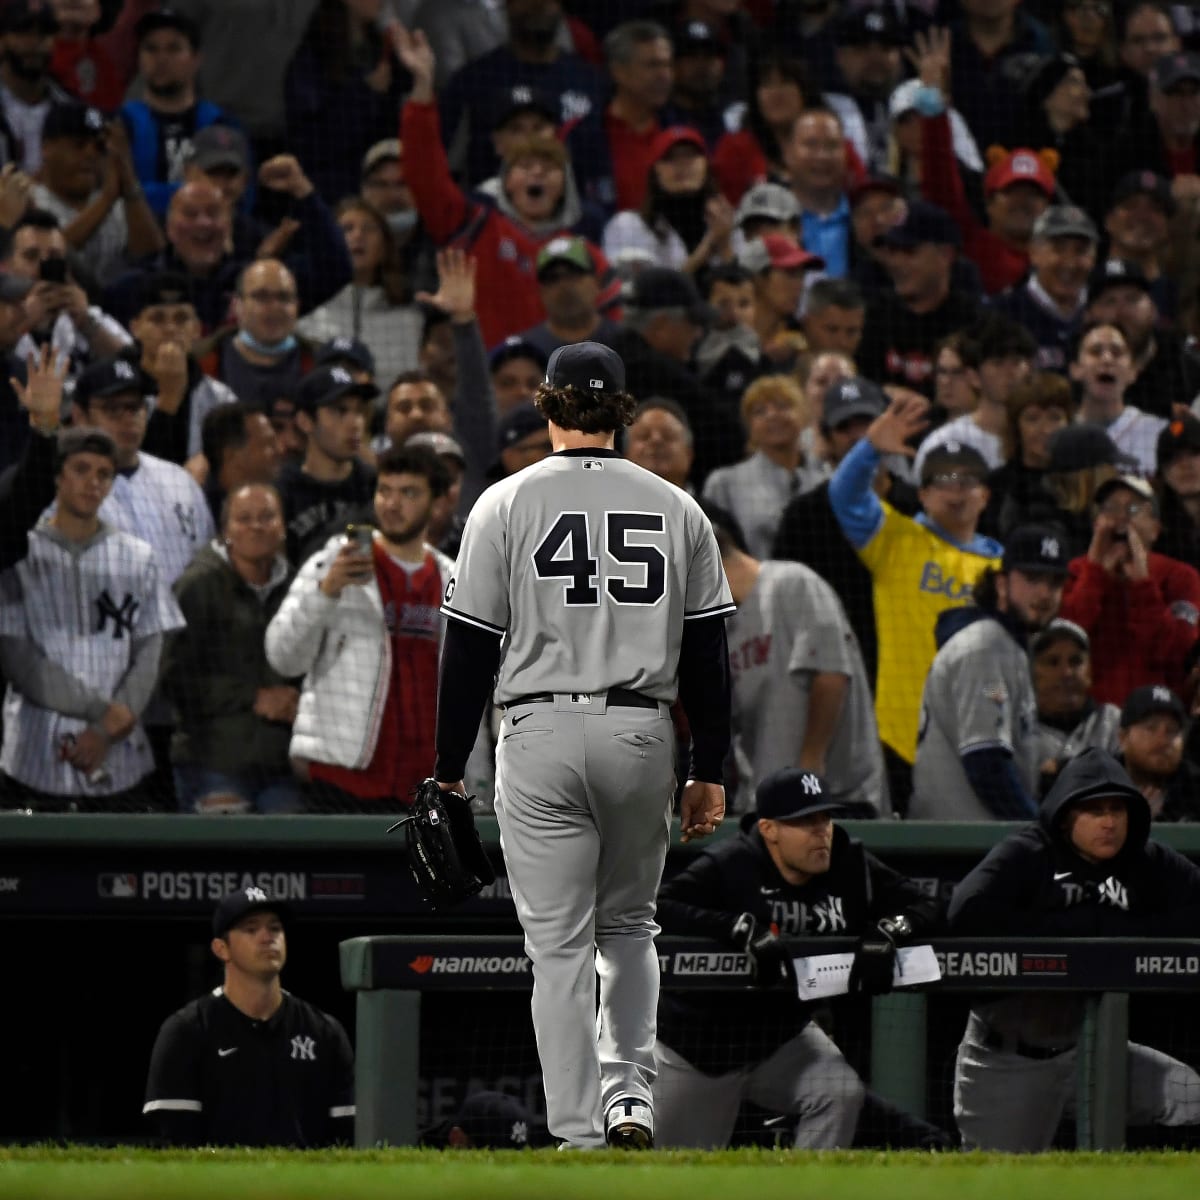 Red Sox rush Cole and end archrival Yankees' season in AL wild card game, MLB